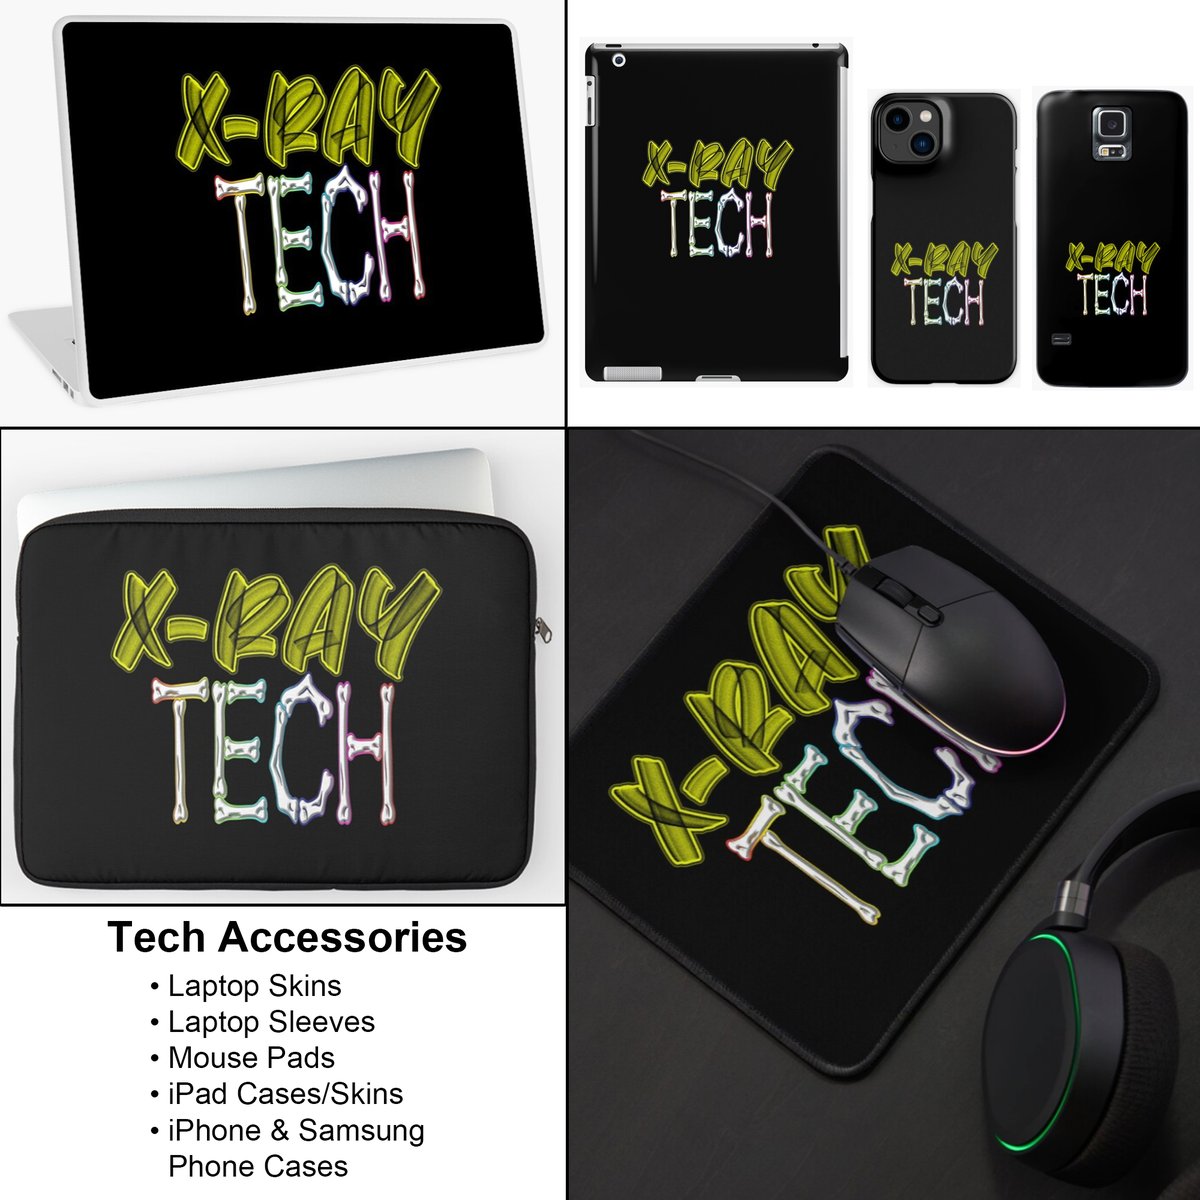 A design with #xraytech 's in mind, shown of a few select products, more in our #redbubbleshop - #xray #radiology #mug #coffeemug #tshirt #phonecase #showercurtain #clock #ballcap #cap #coaster #bathmat #throwblanket #waterbottle #mousepad #backpack Shop->redbubble.com/shop/ap/145990…